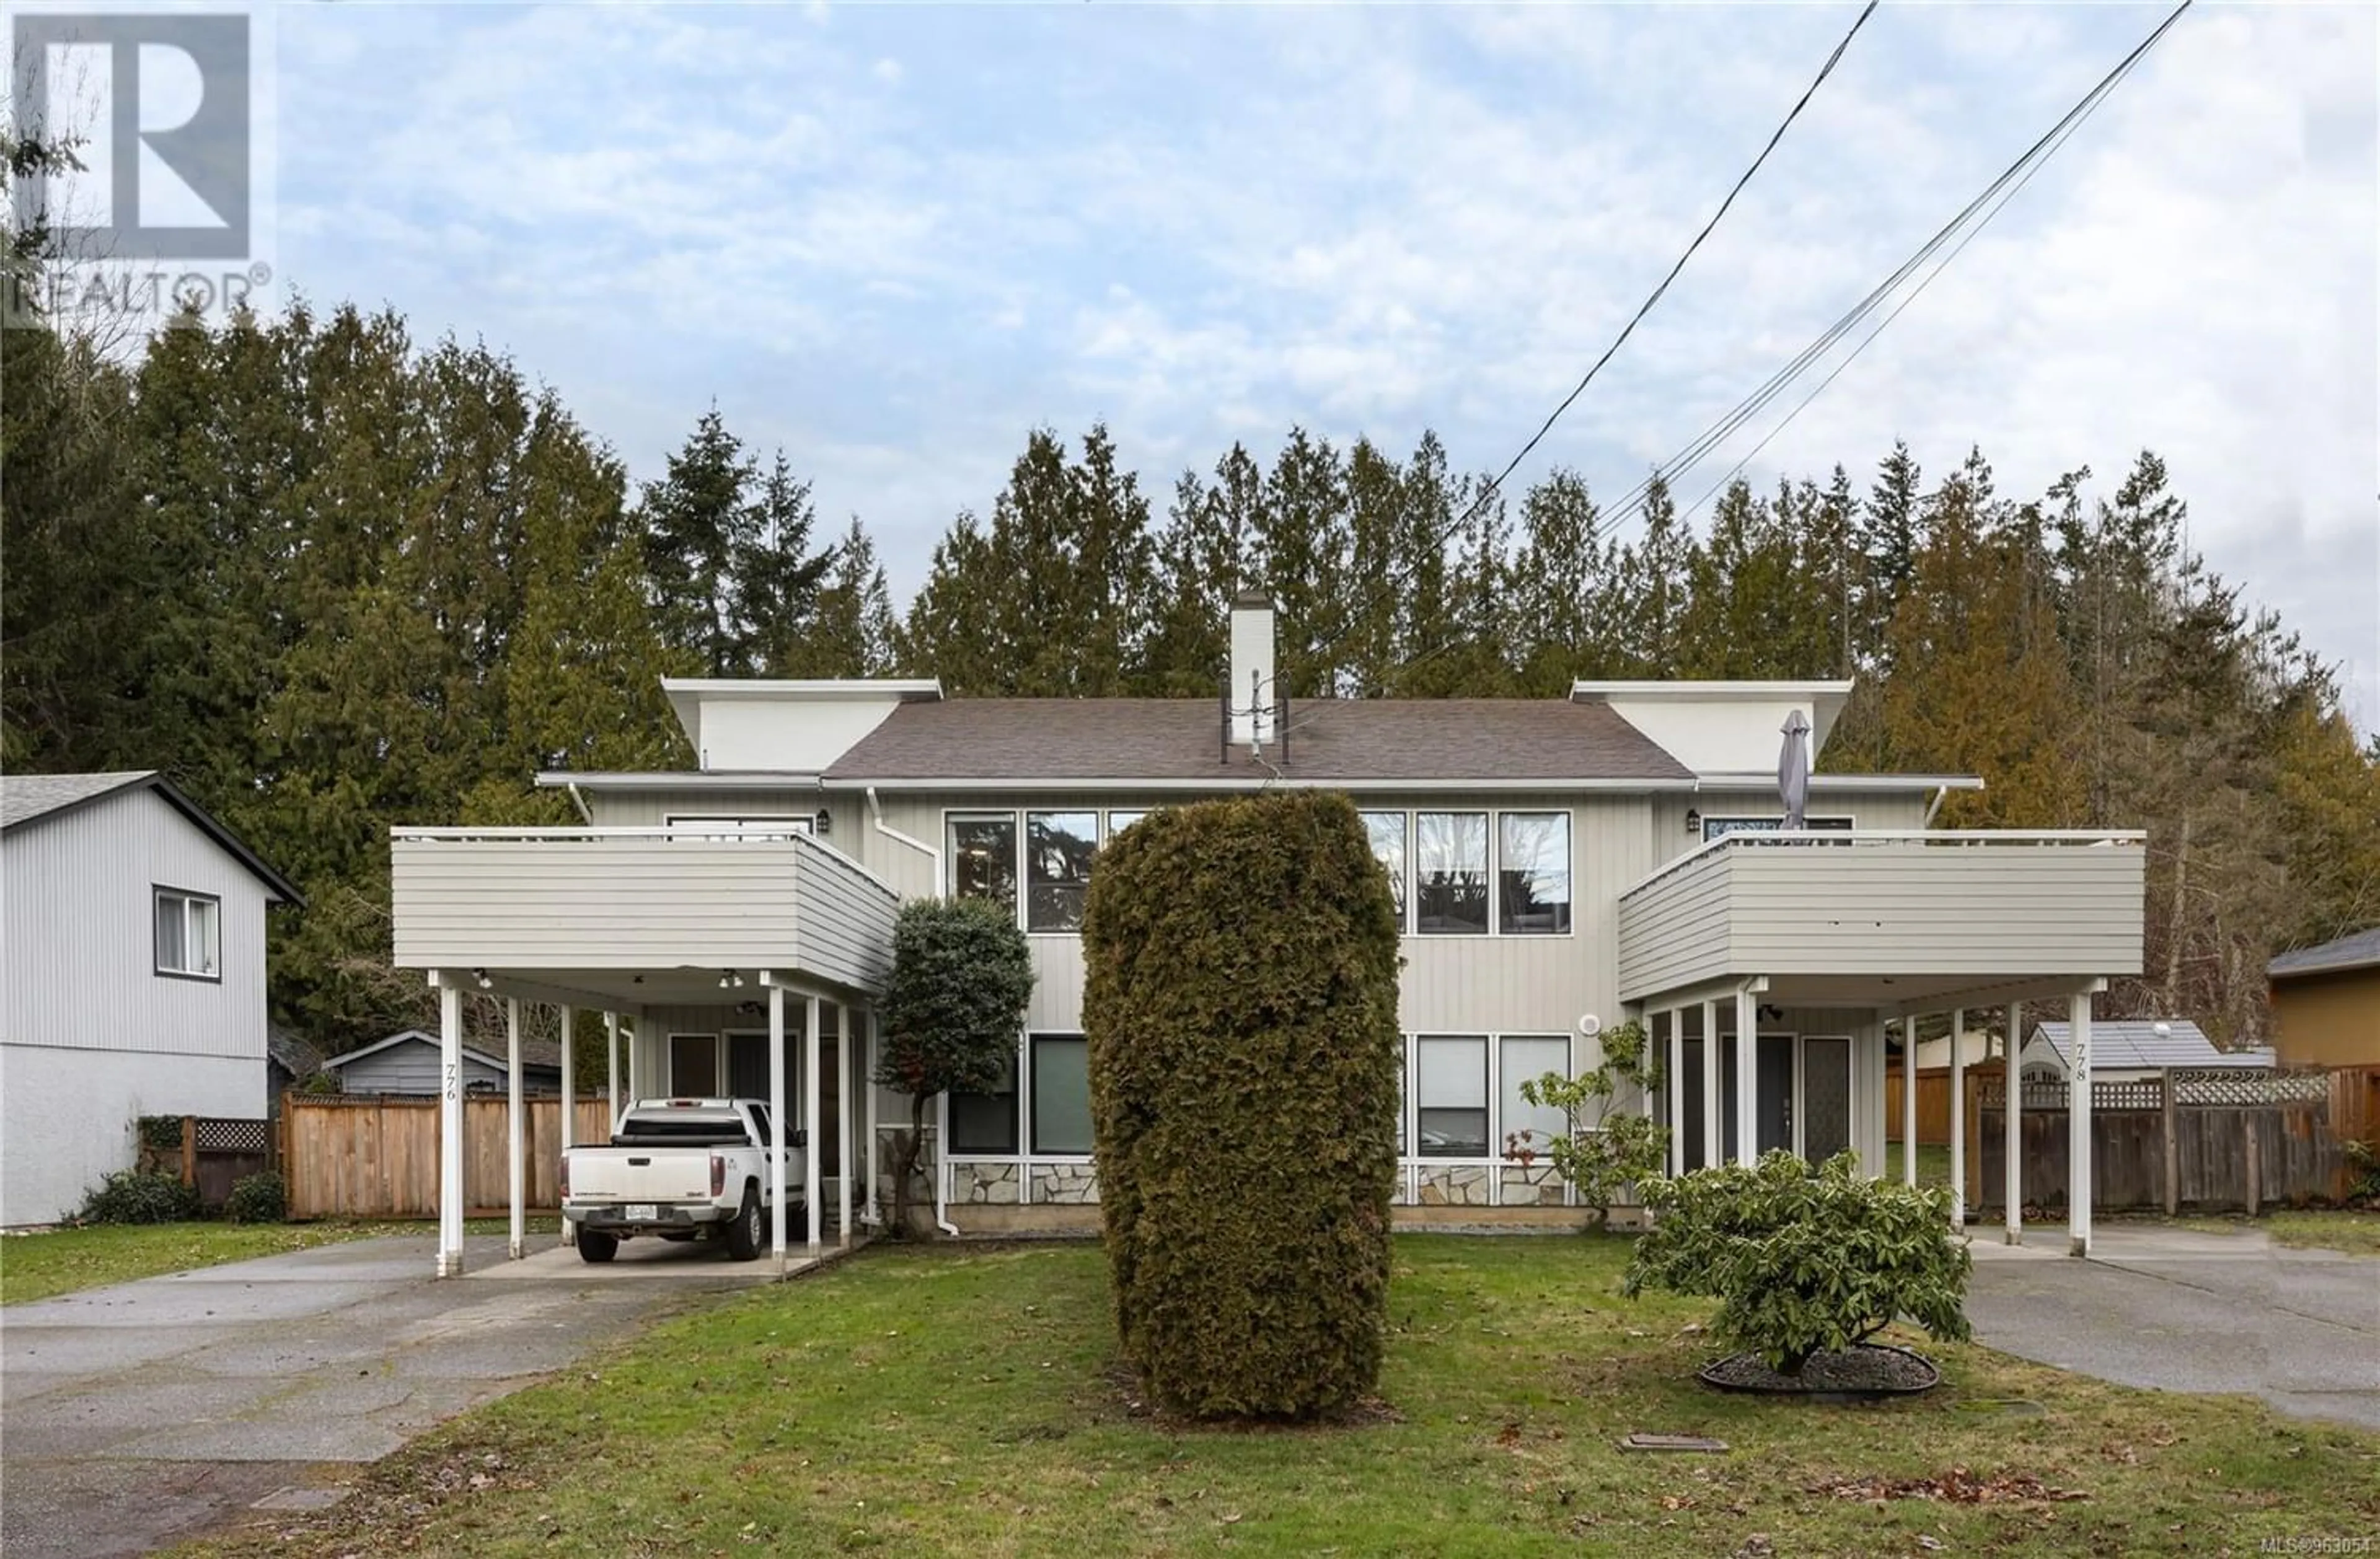 Outside view for 776/778 Royal Oak Ave, Saanich British Columbia V8X3T1